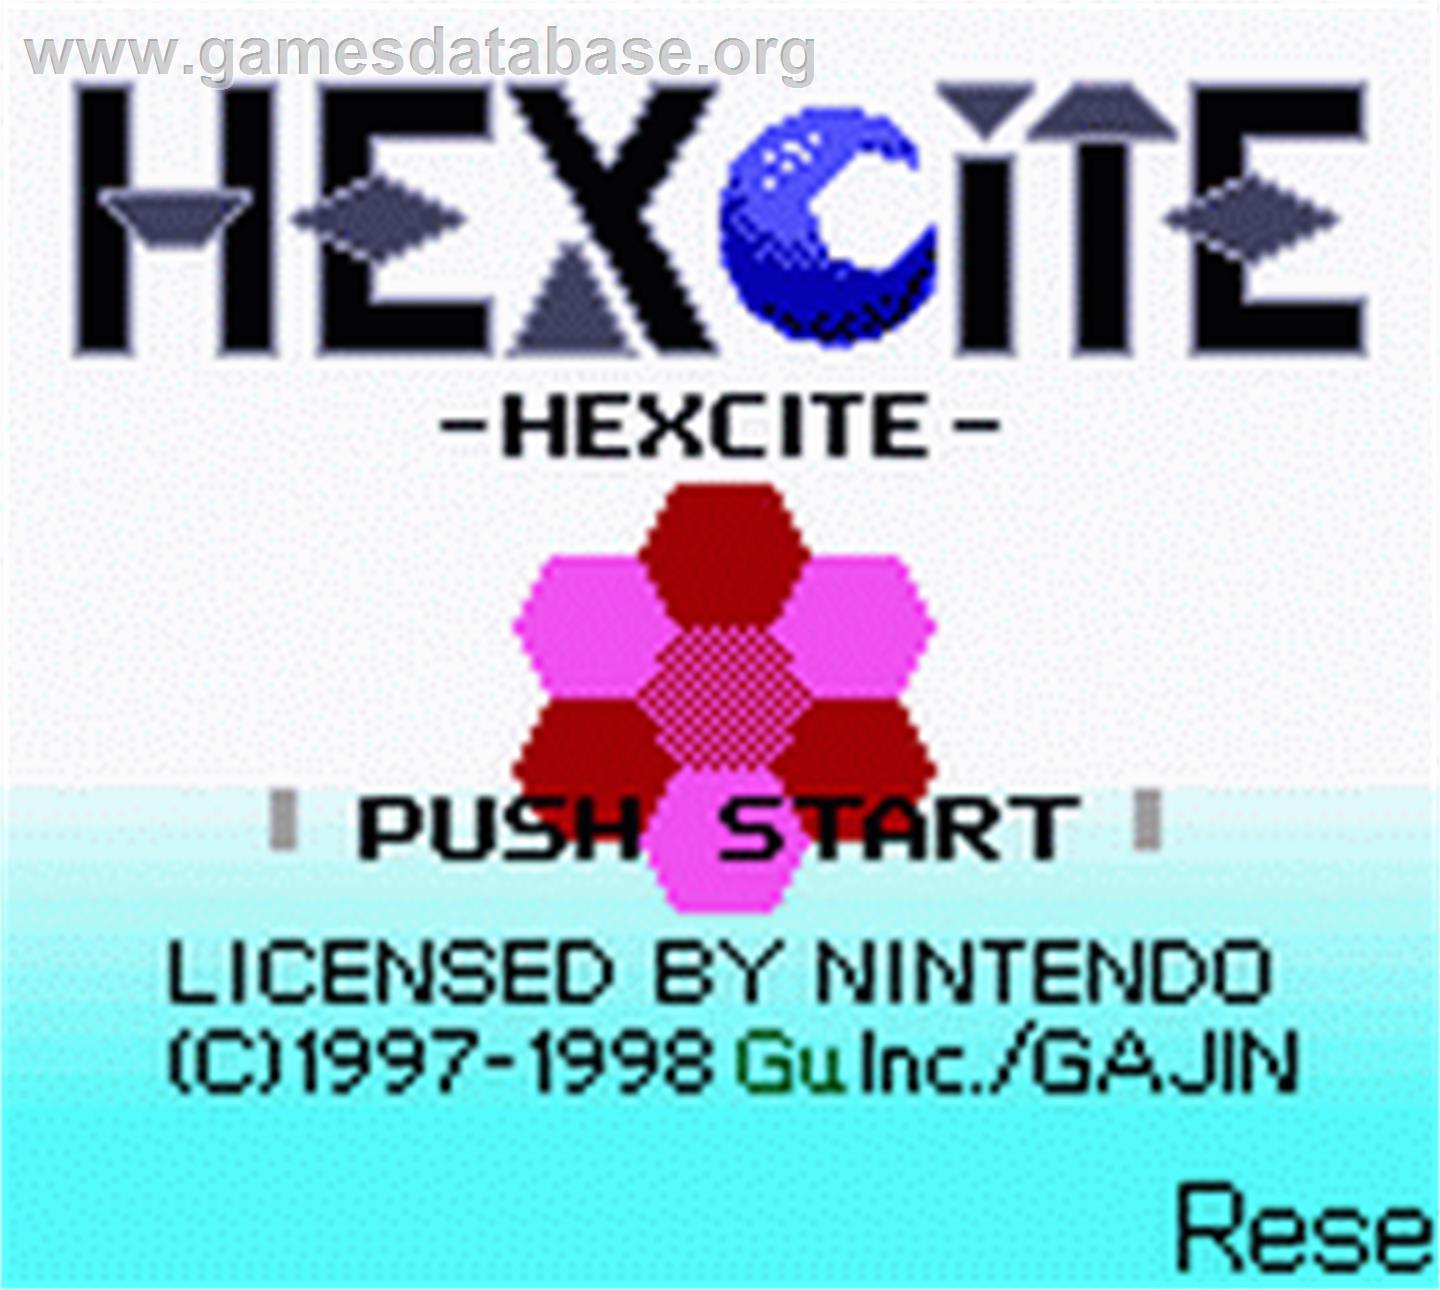 Hexcite: The Shapes of Victory - Nintendo Game Boy Color - Artwork - Title Screen